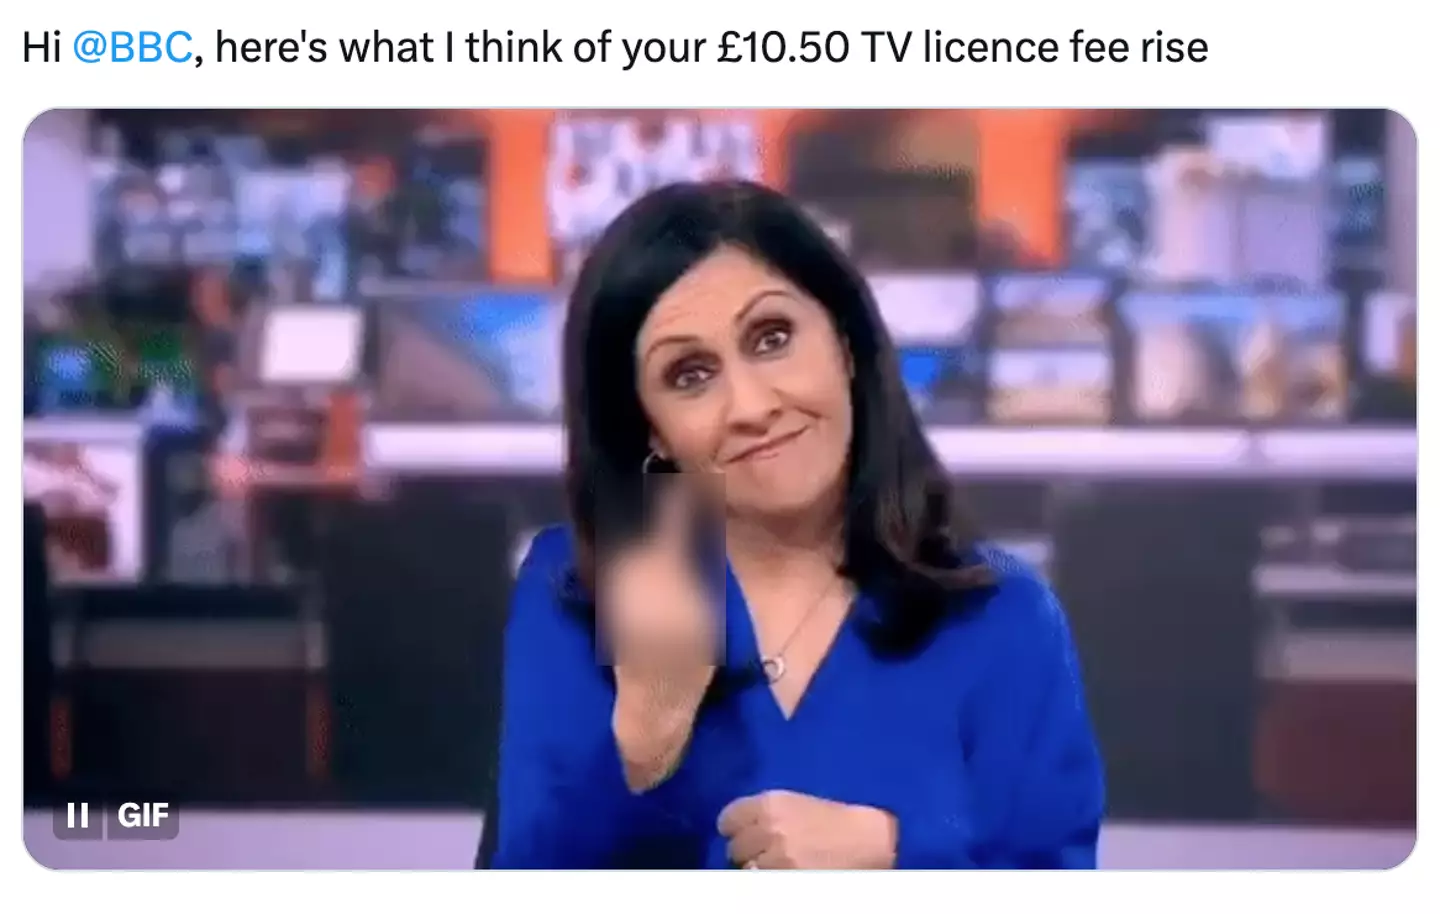 The BBC presenter has been made into a GIF to depict their resentment over the price increase.